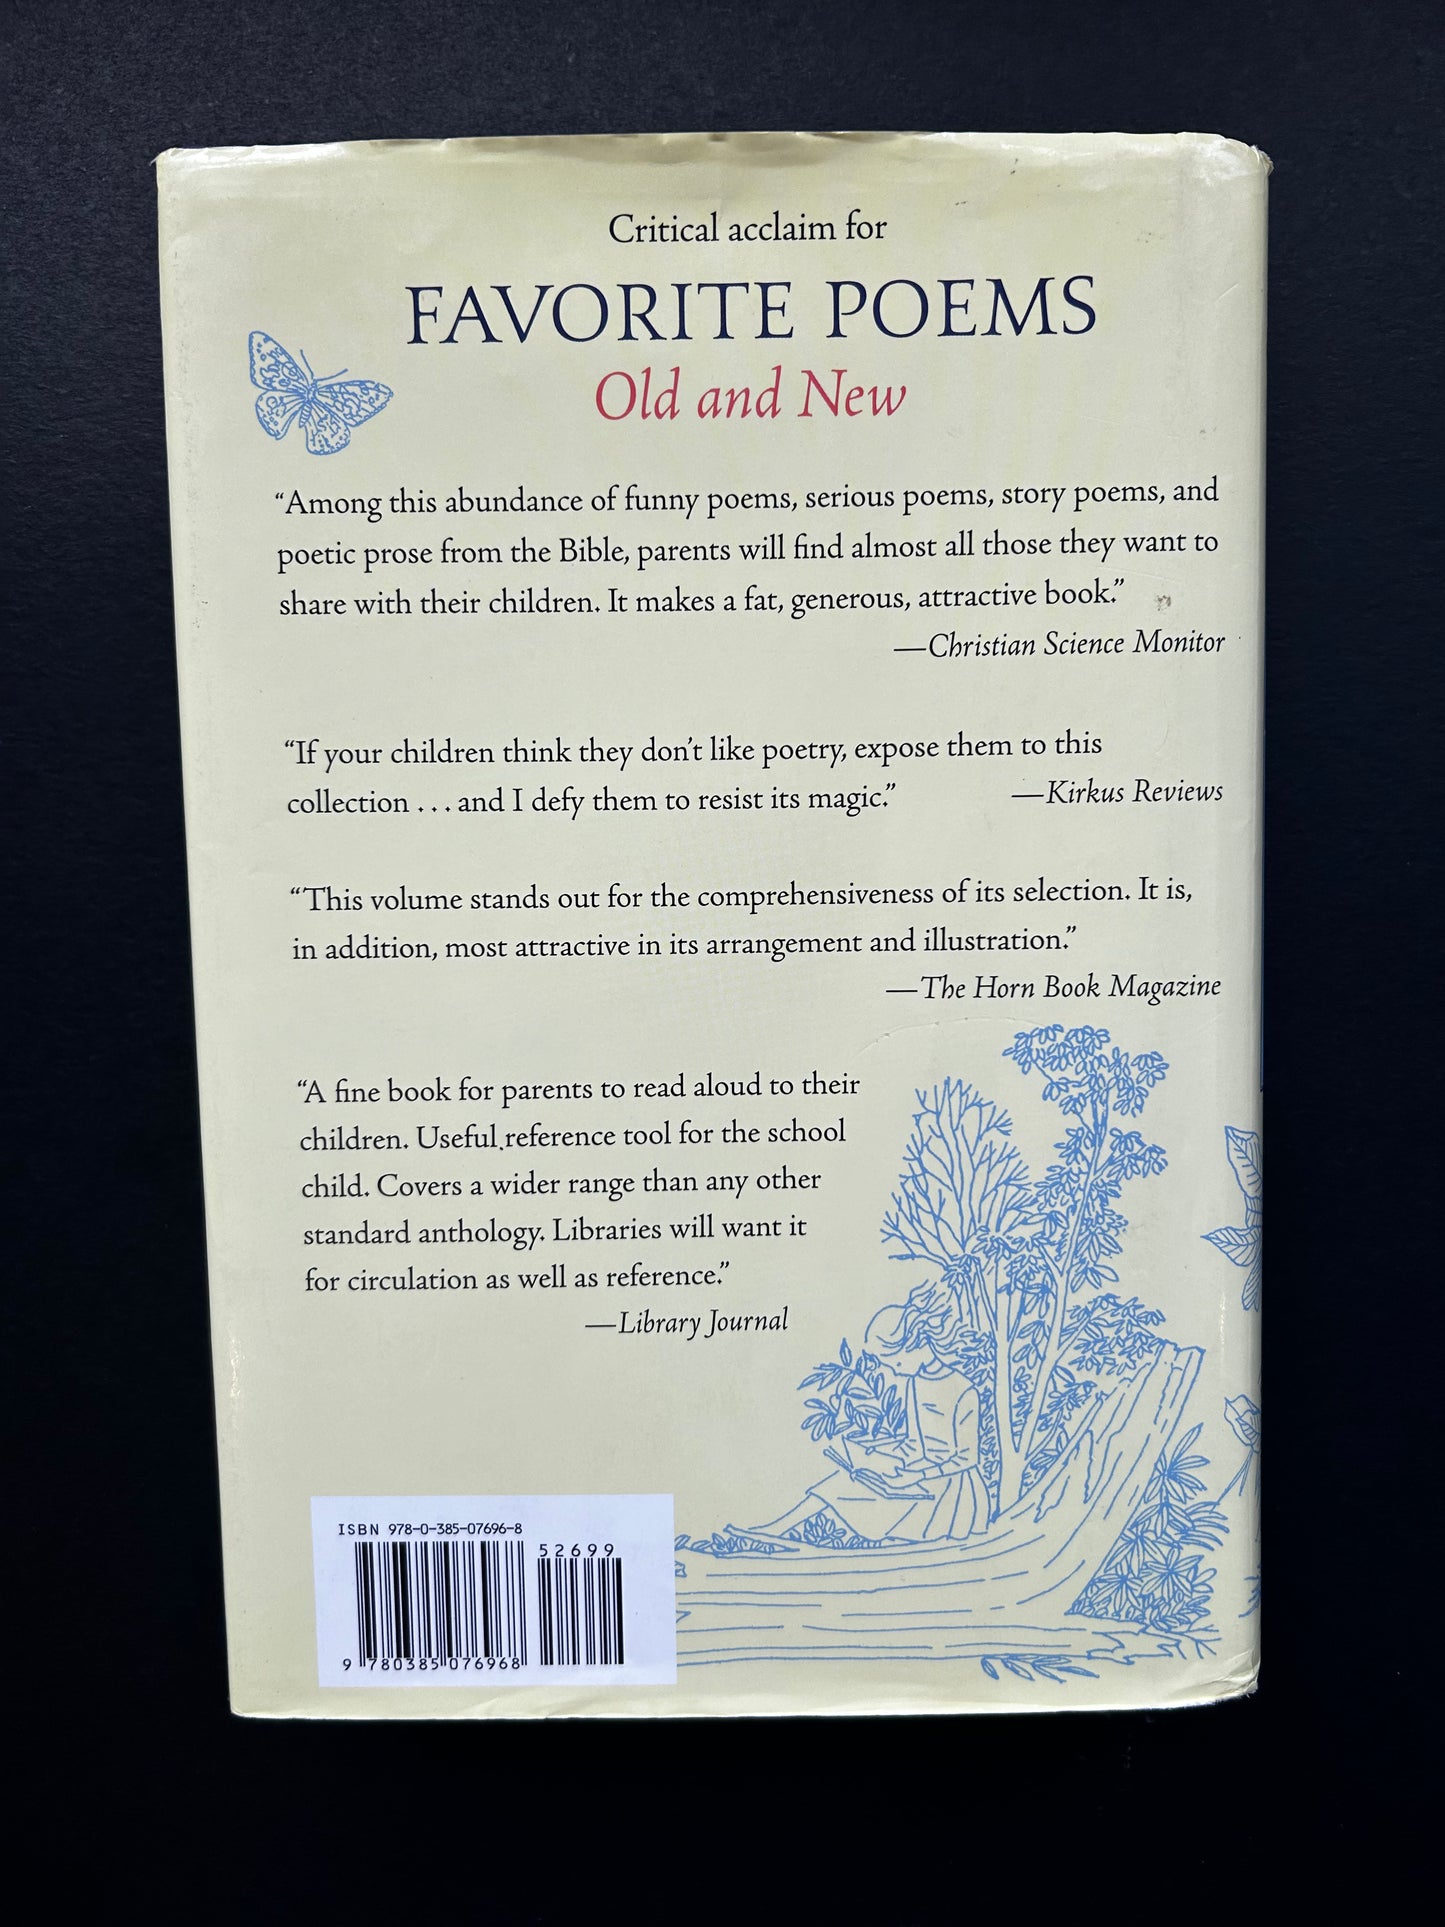 Favorite poems old and new